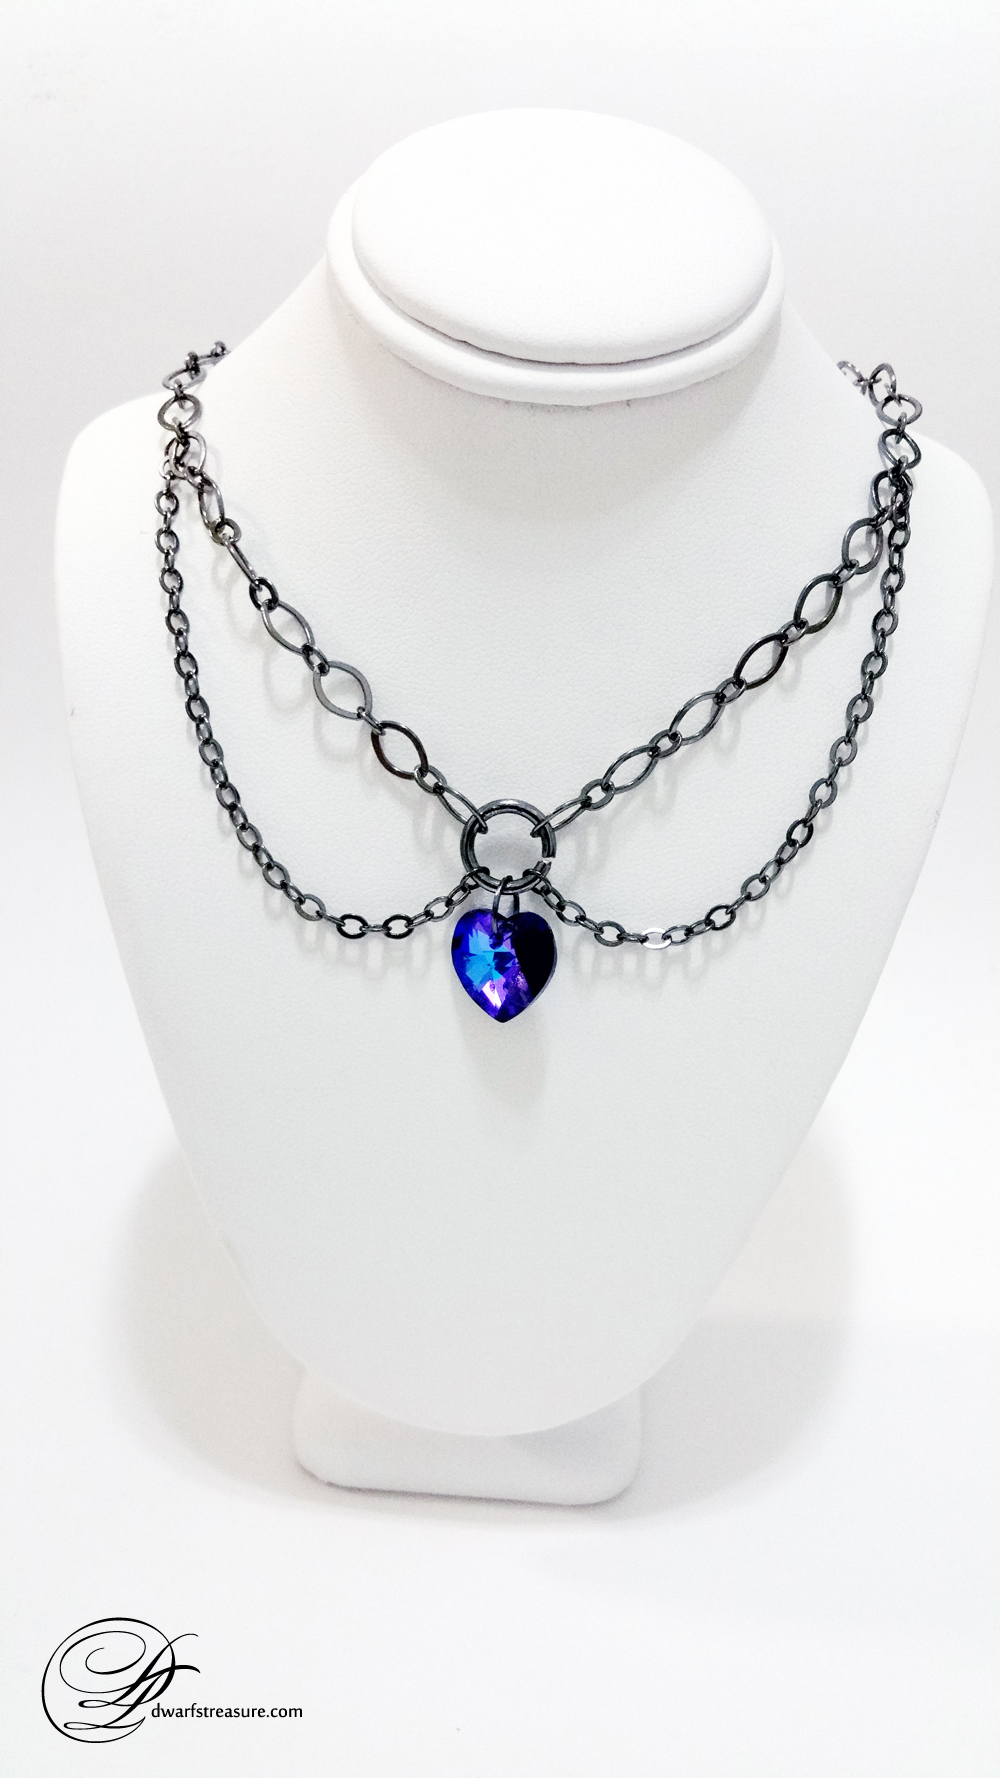 unique double chain necklace with ultraviolet Swarovski Crystal heart pendant